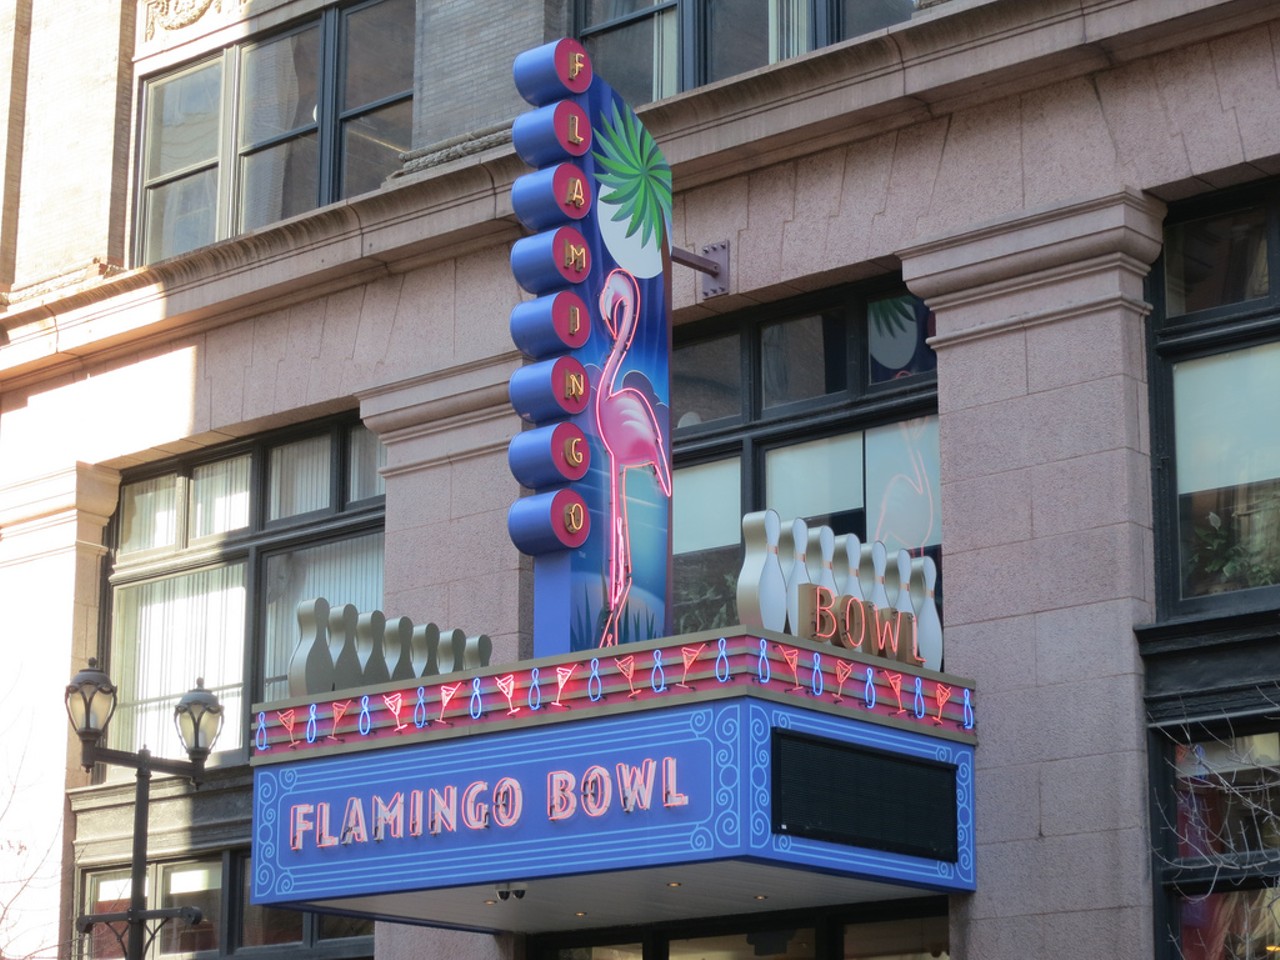 Flamingo Bowl
1117 Washington Ave. 
St. Louis, MO 63101
(314) 436-6666
Downtown&#146;s Flamingo Bowl keeps the same hours for your bowling pleasure. Flamingo Bowl offers food and signature cocktails, too. Photo courtesy of Flickr / Paul Sableman.